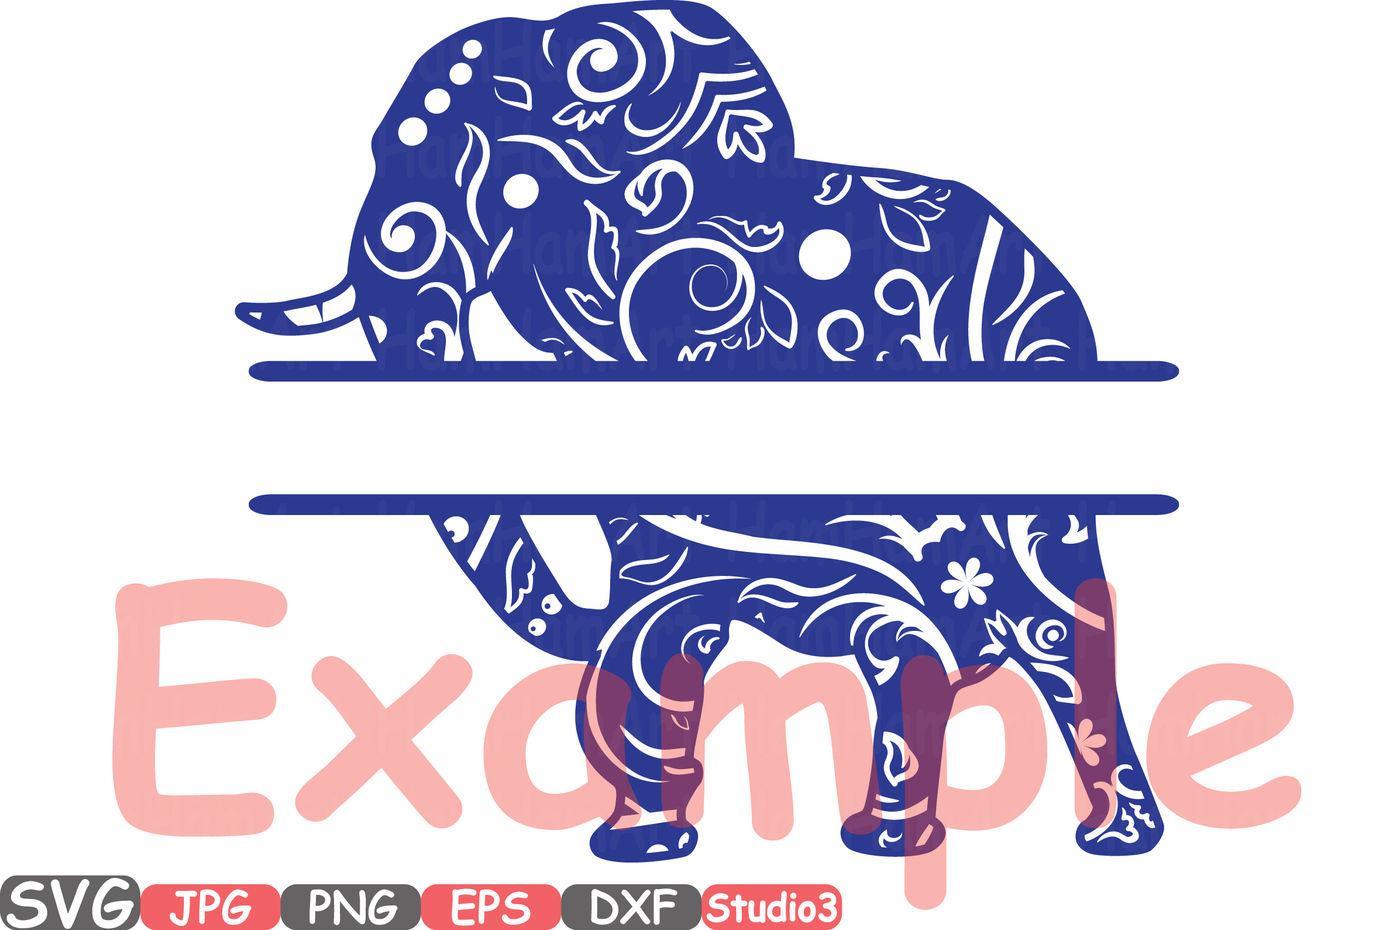 Download Svg Elephant Silhouette for Cricut, Silhouette ...